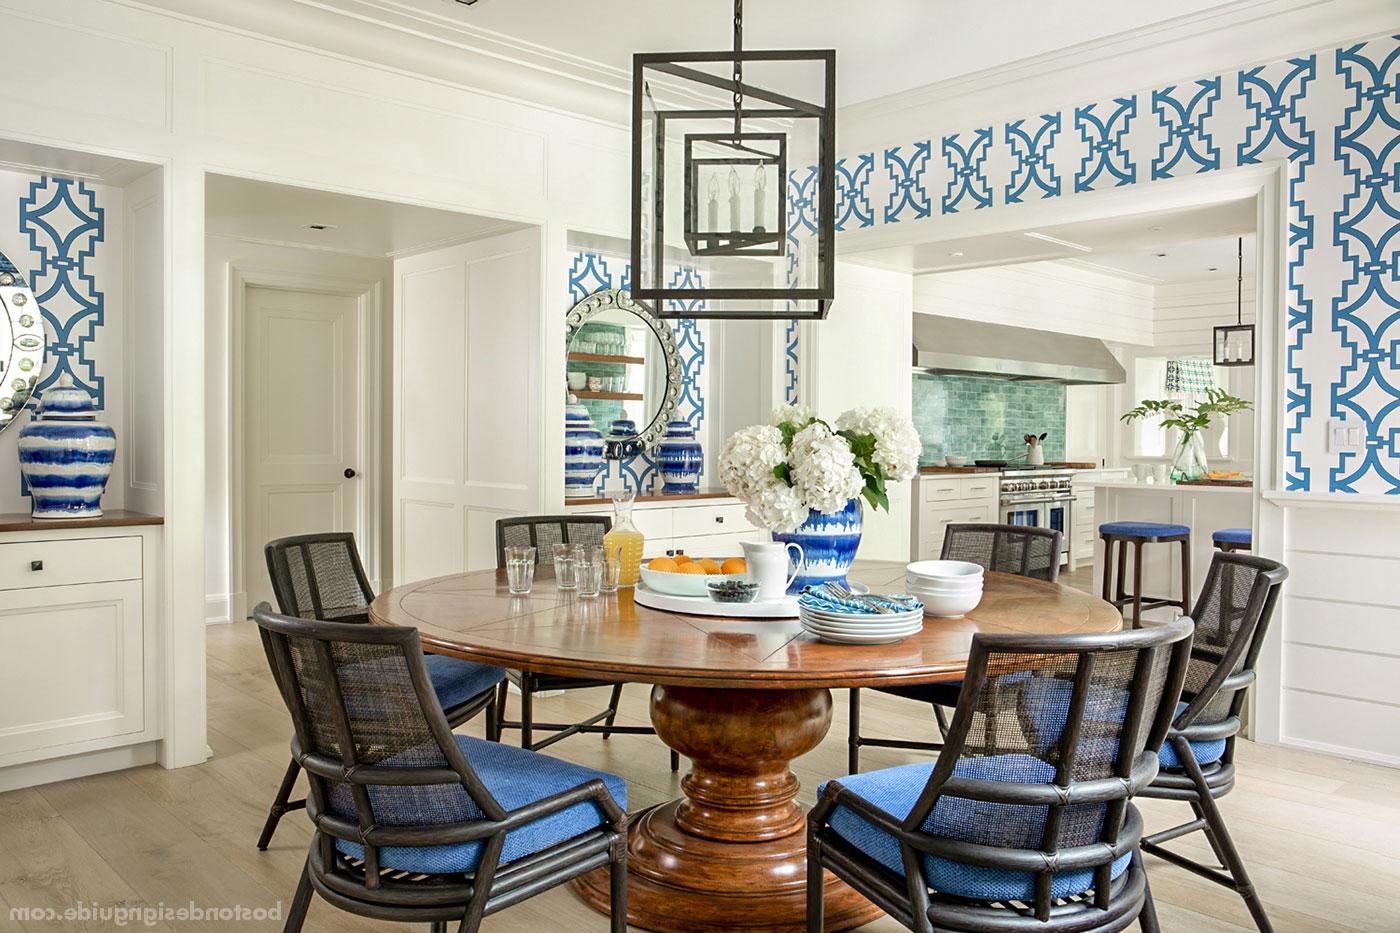 Casual Cape Cod blue and white dining room with bold patterns